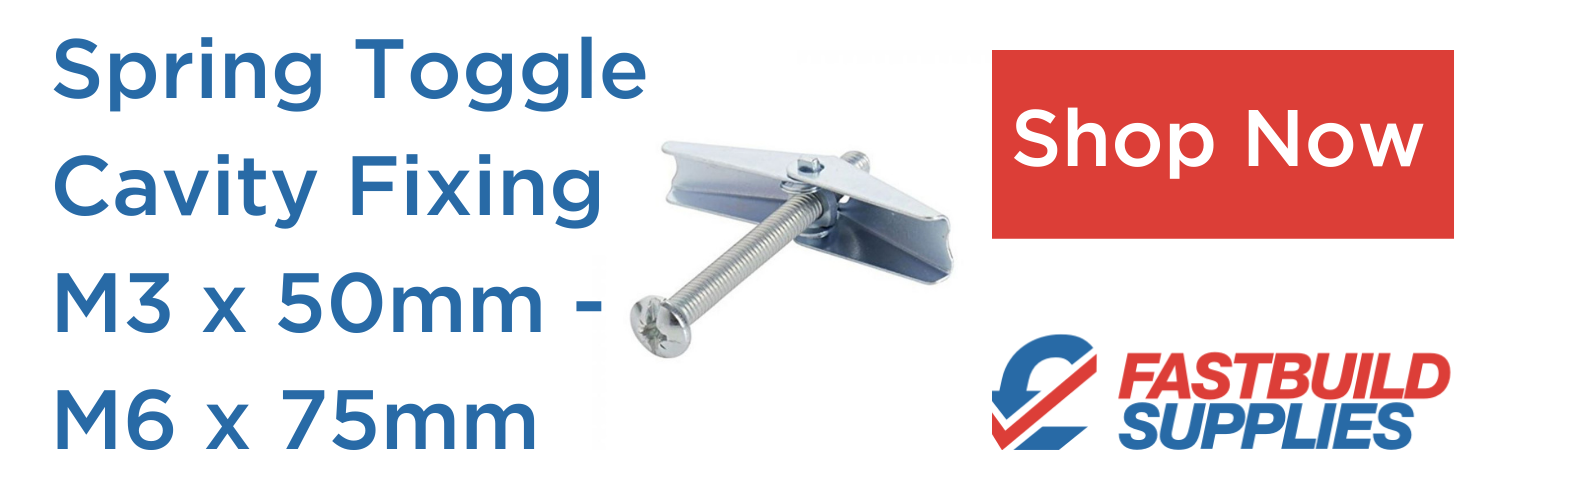 Buy spring toggle cavity fixings online